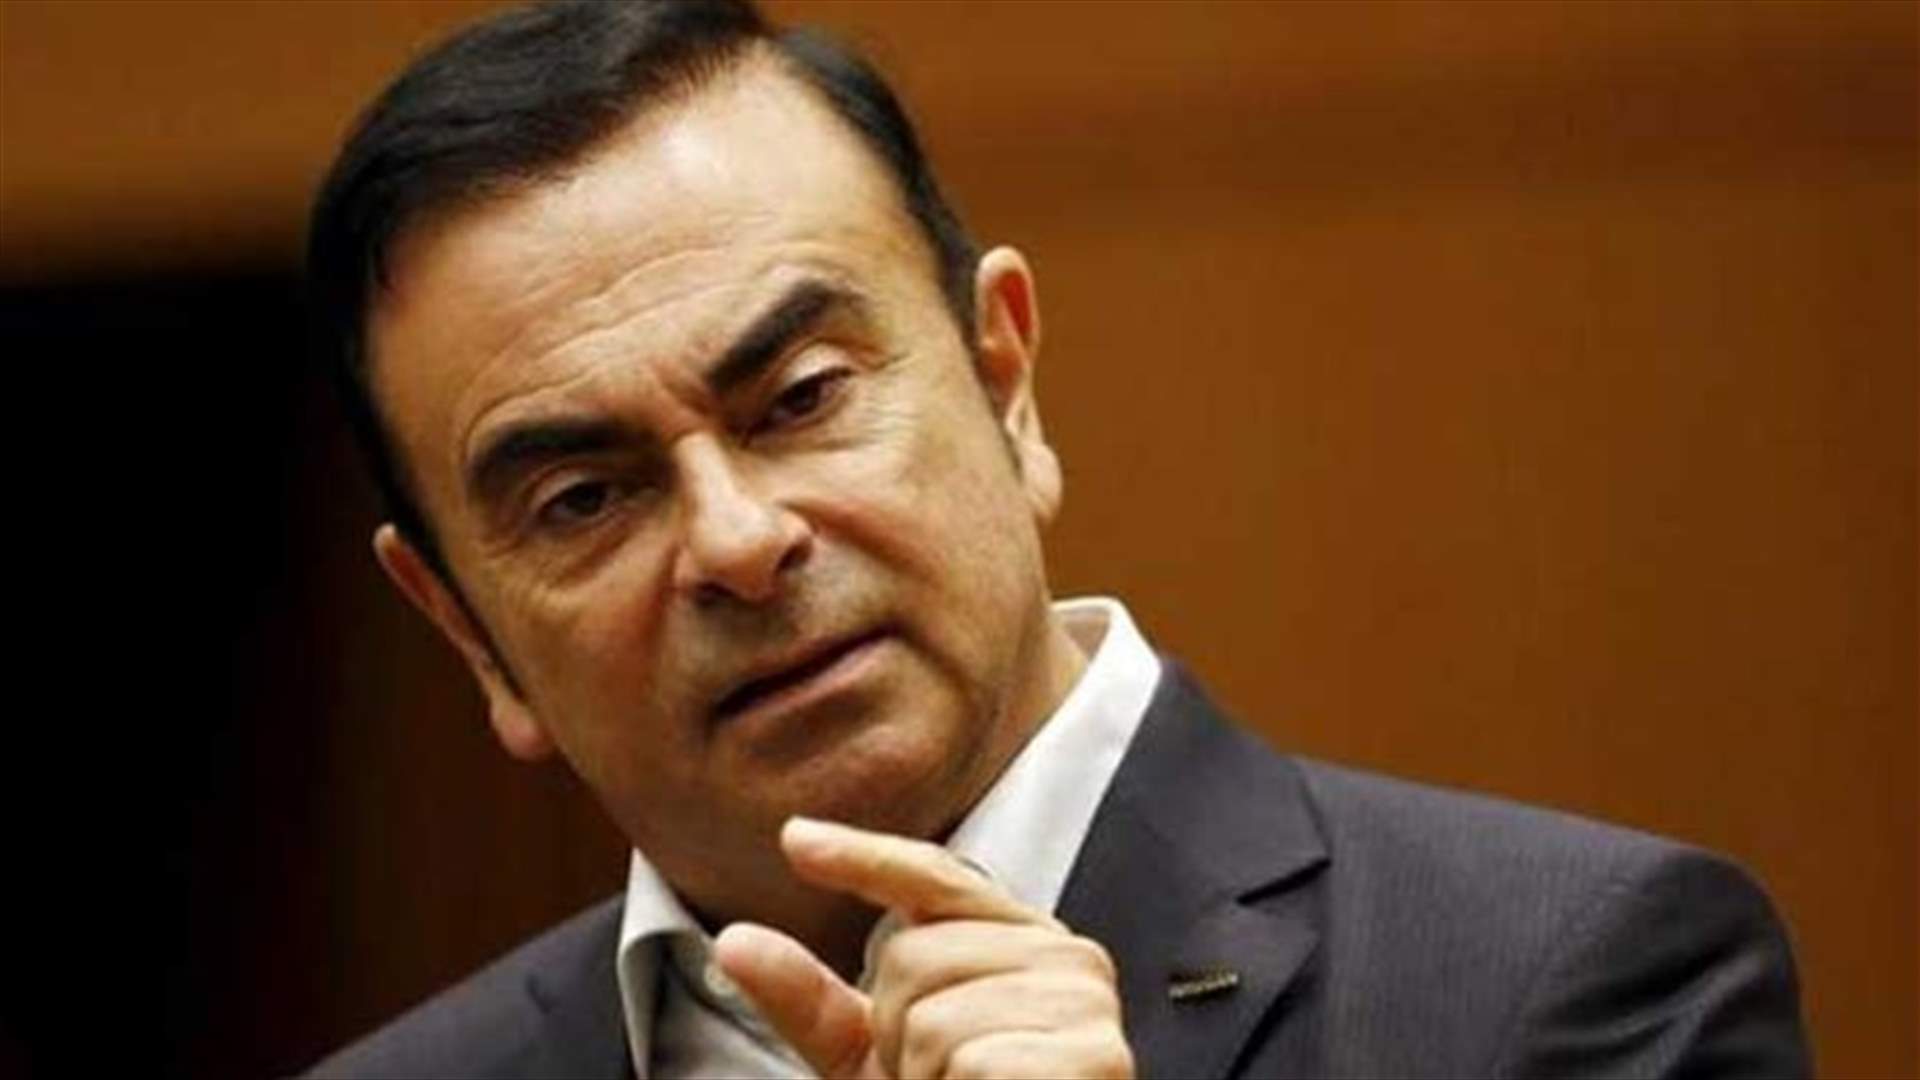 Ghosn Cedes Nissan CEO Role To Focus On Alliance With Renault, Mitsubishi